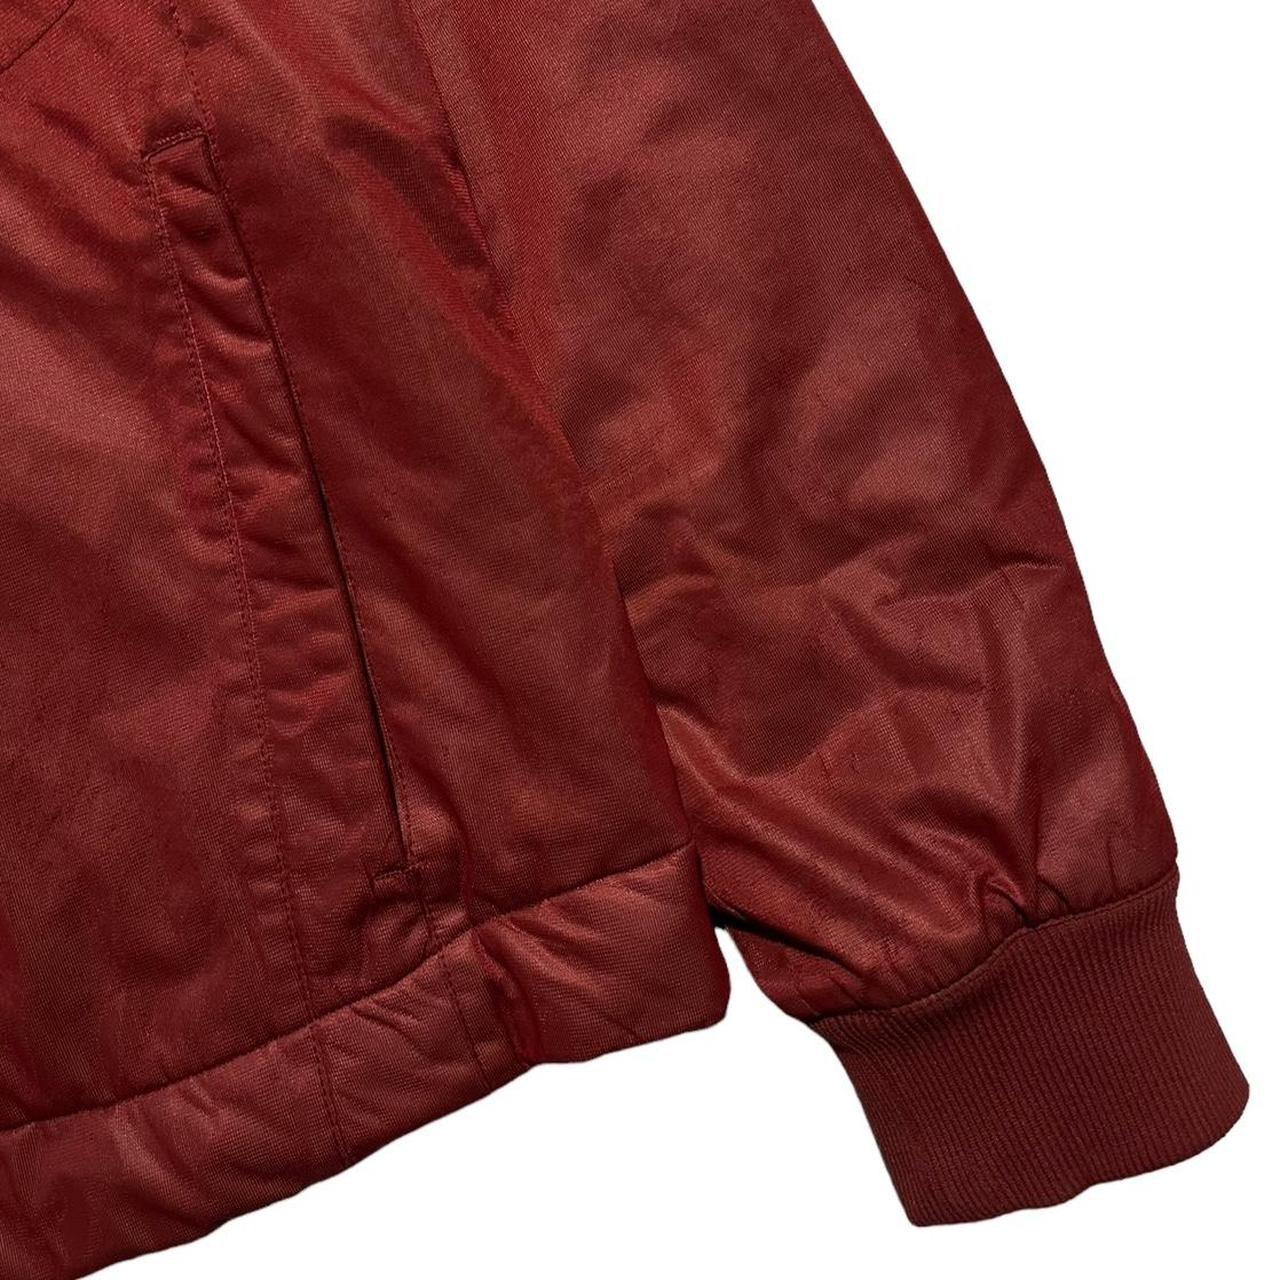 Stone Island Red Padded Down Jacket - Known Source